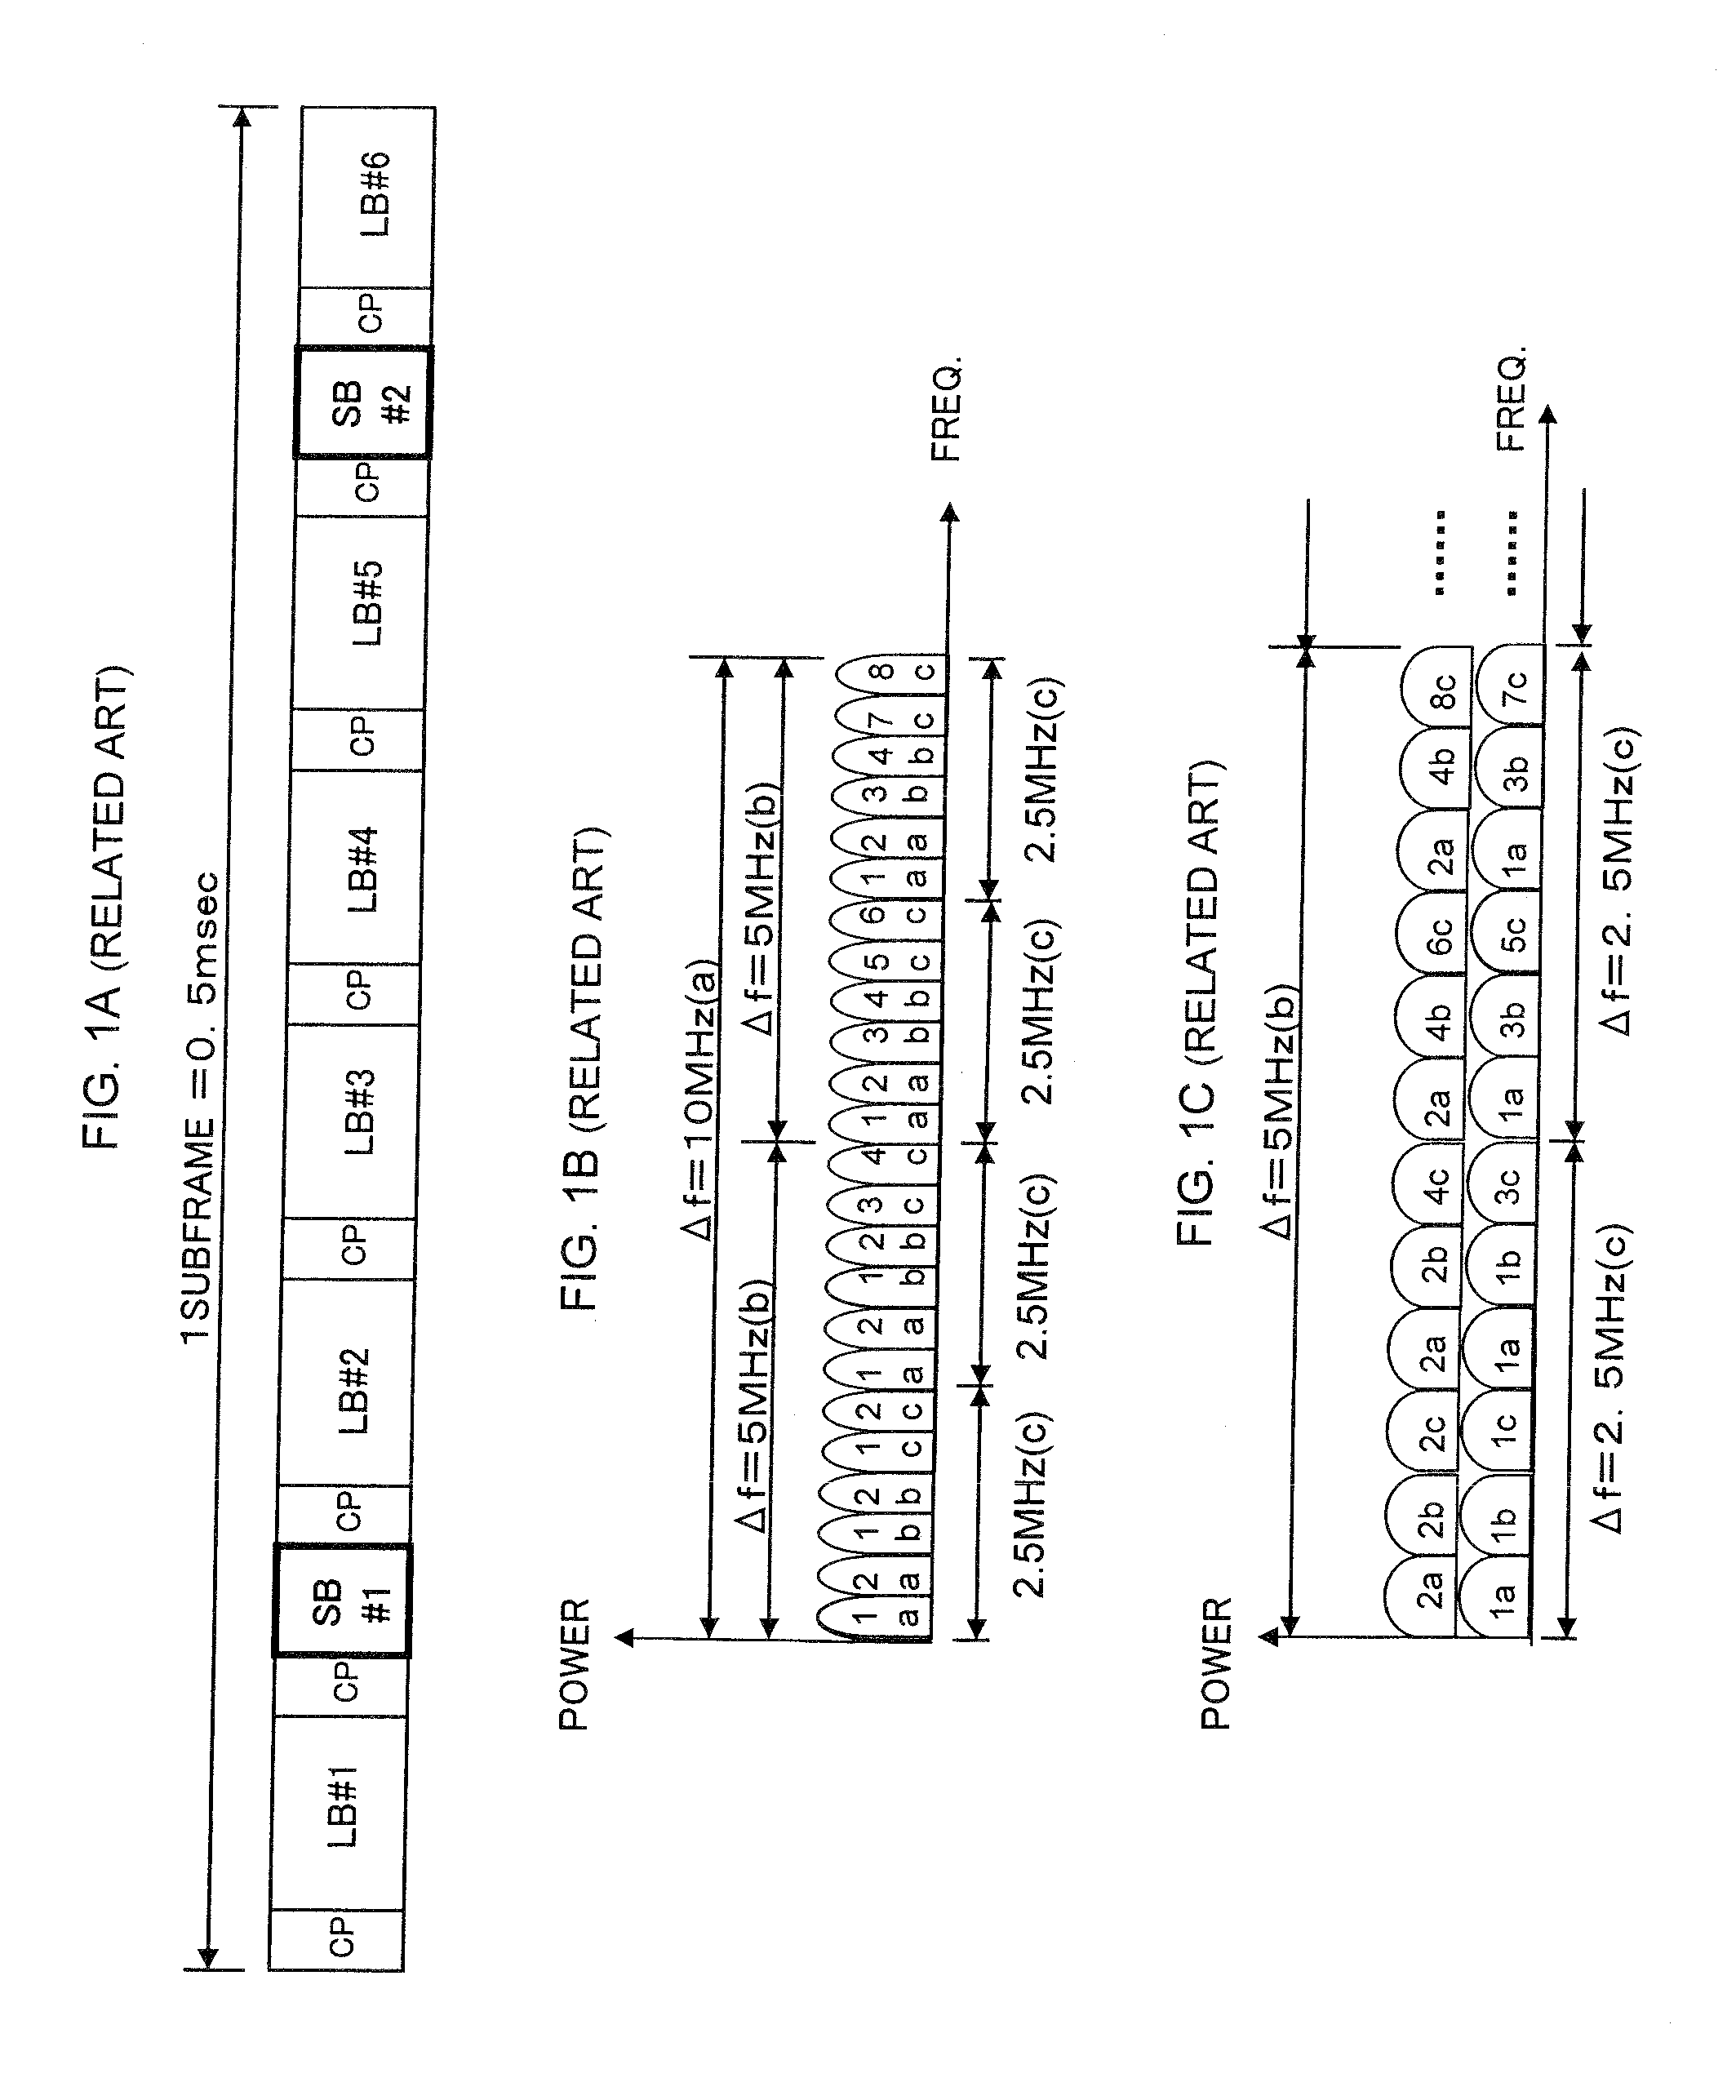 Reference signal multiplexing and resource allocation